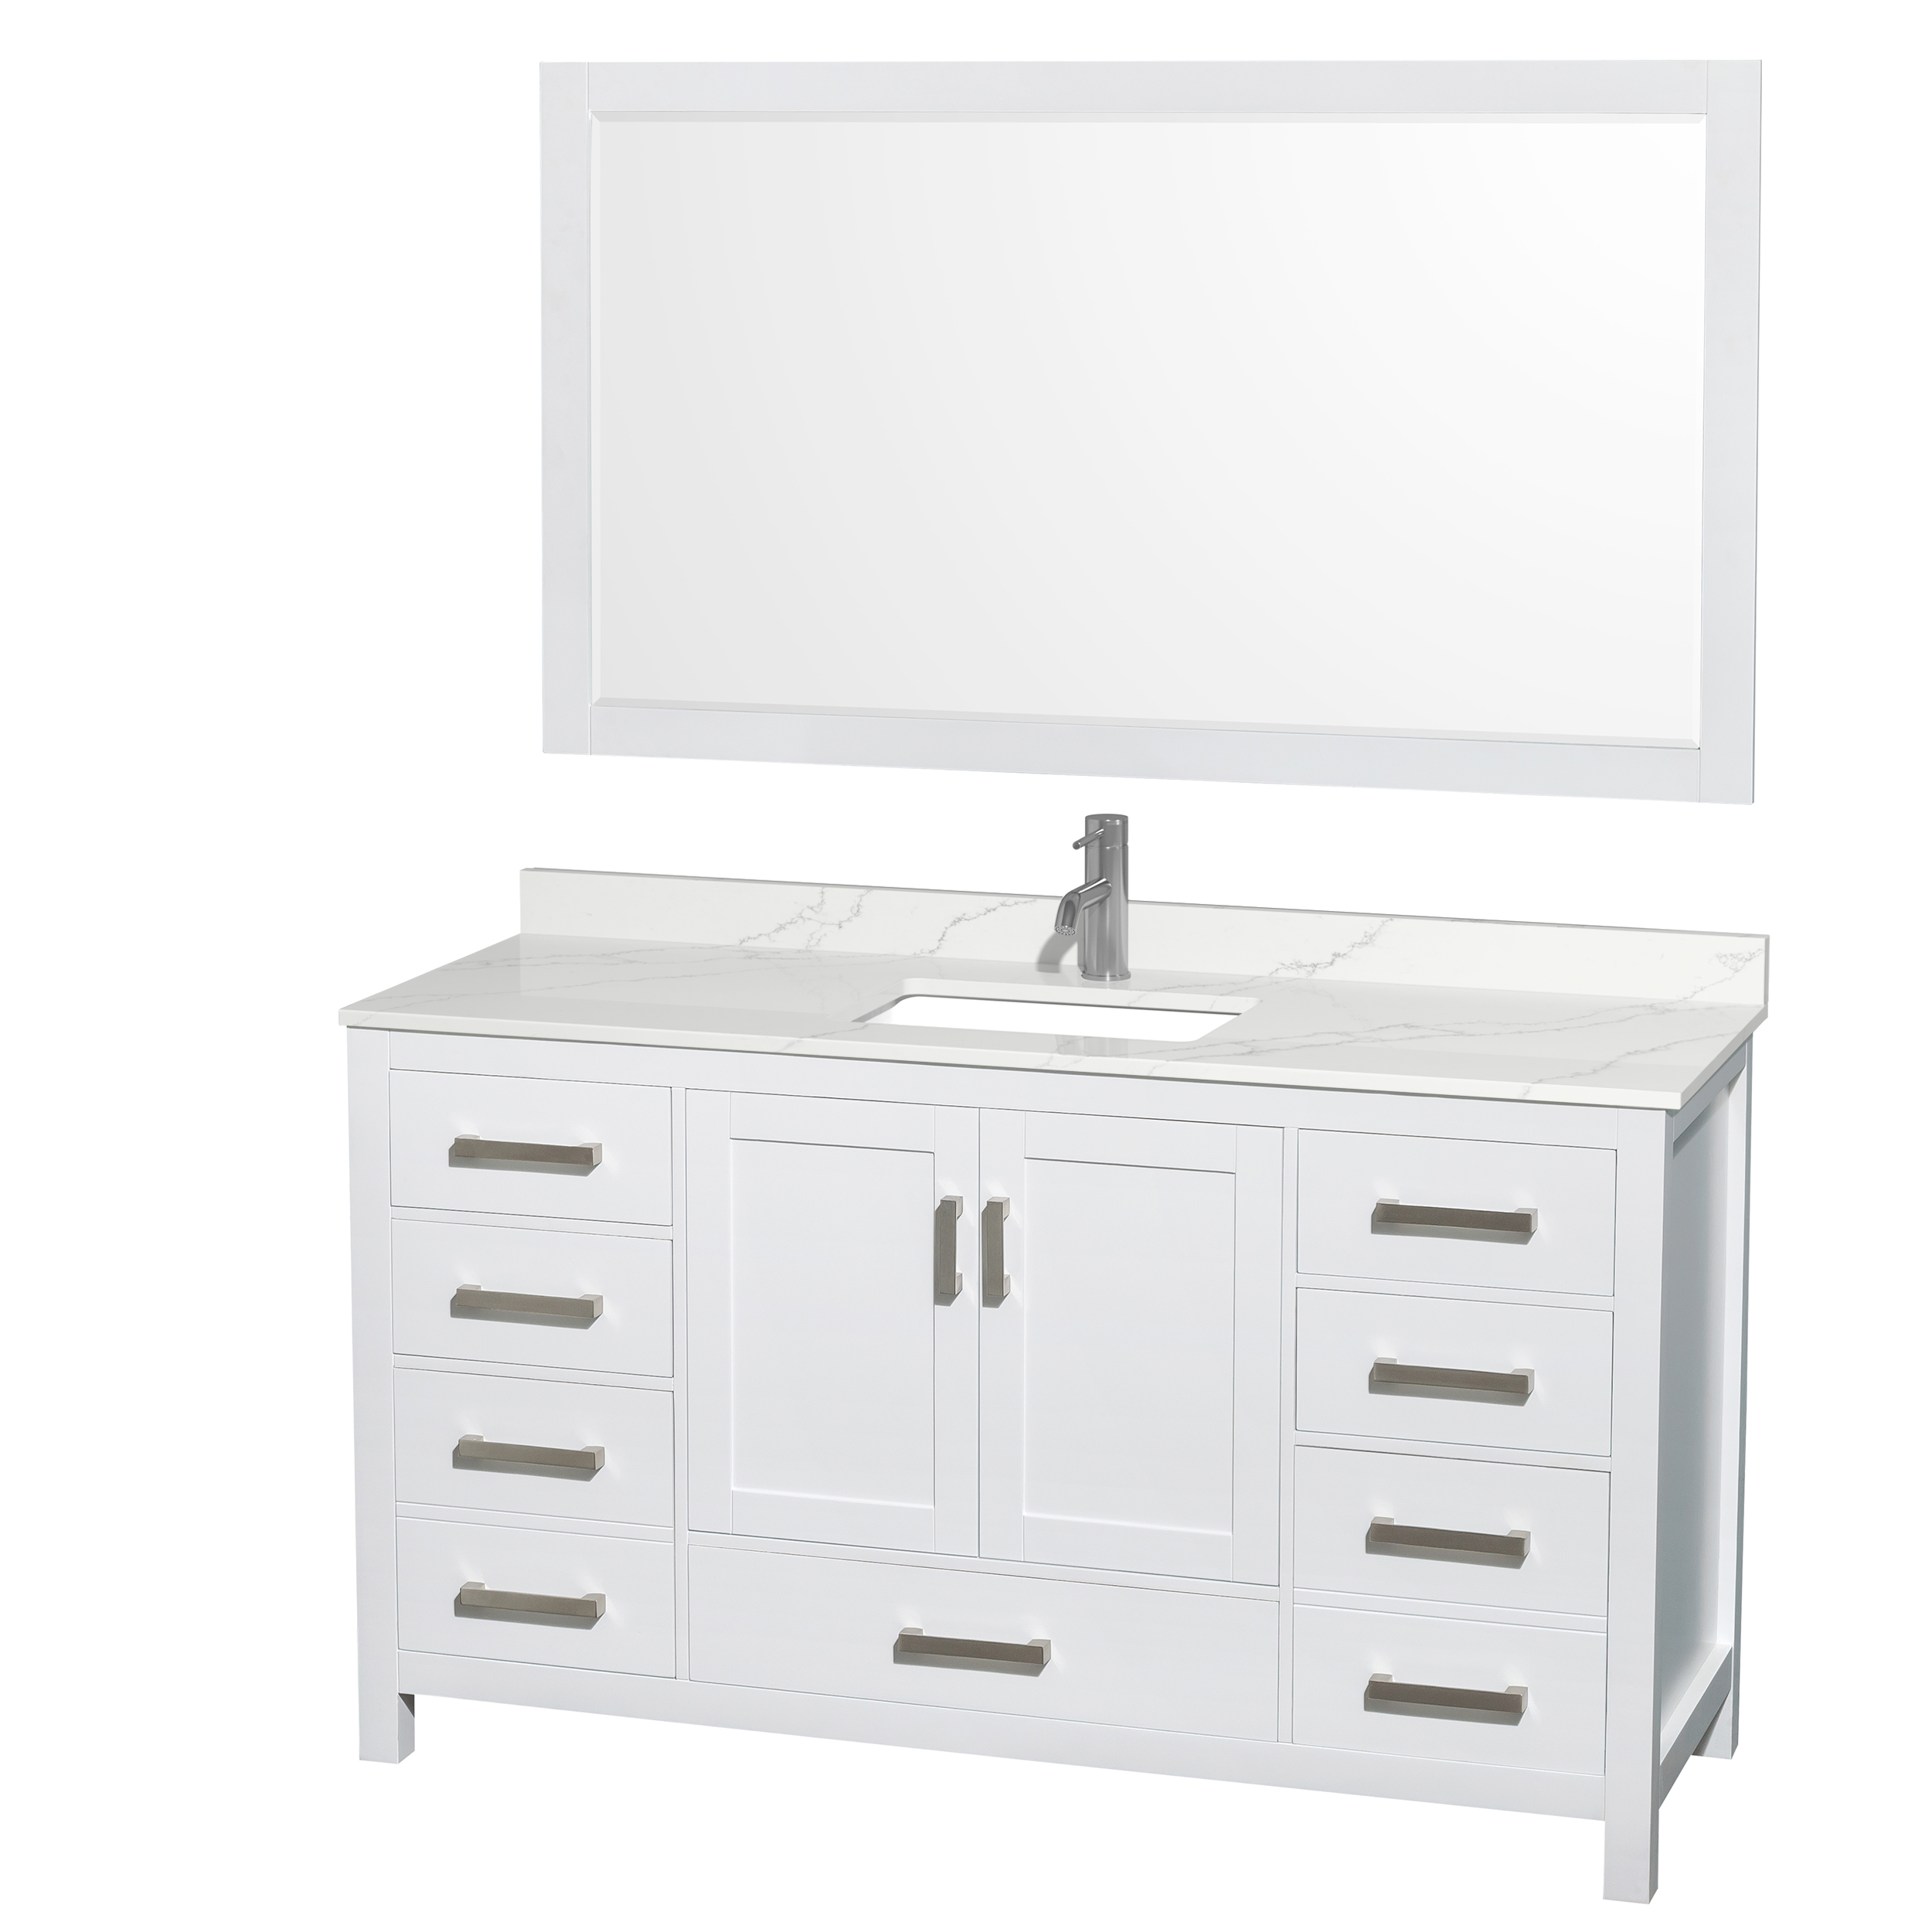 sheffield 60" single bathroom vanity by wyndham collection - white